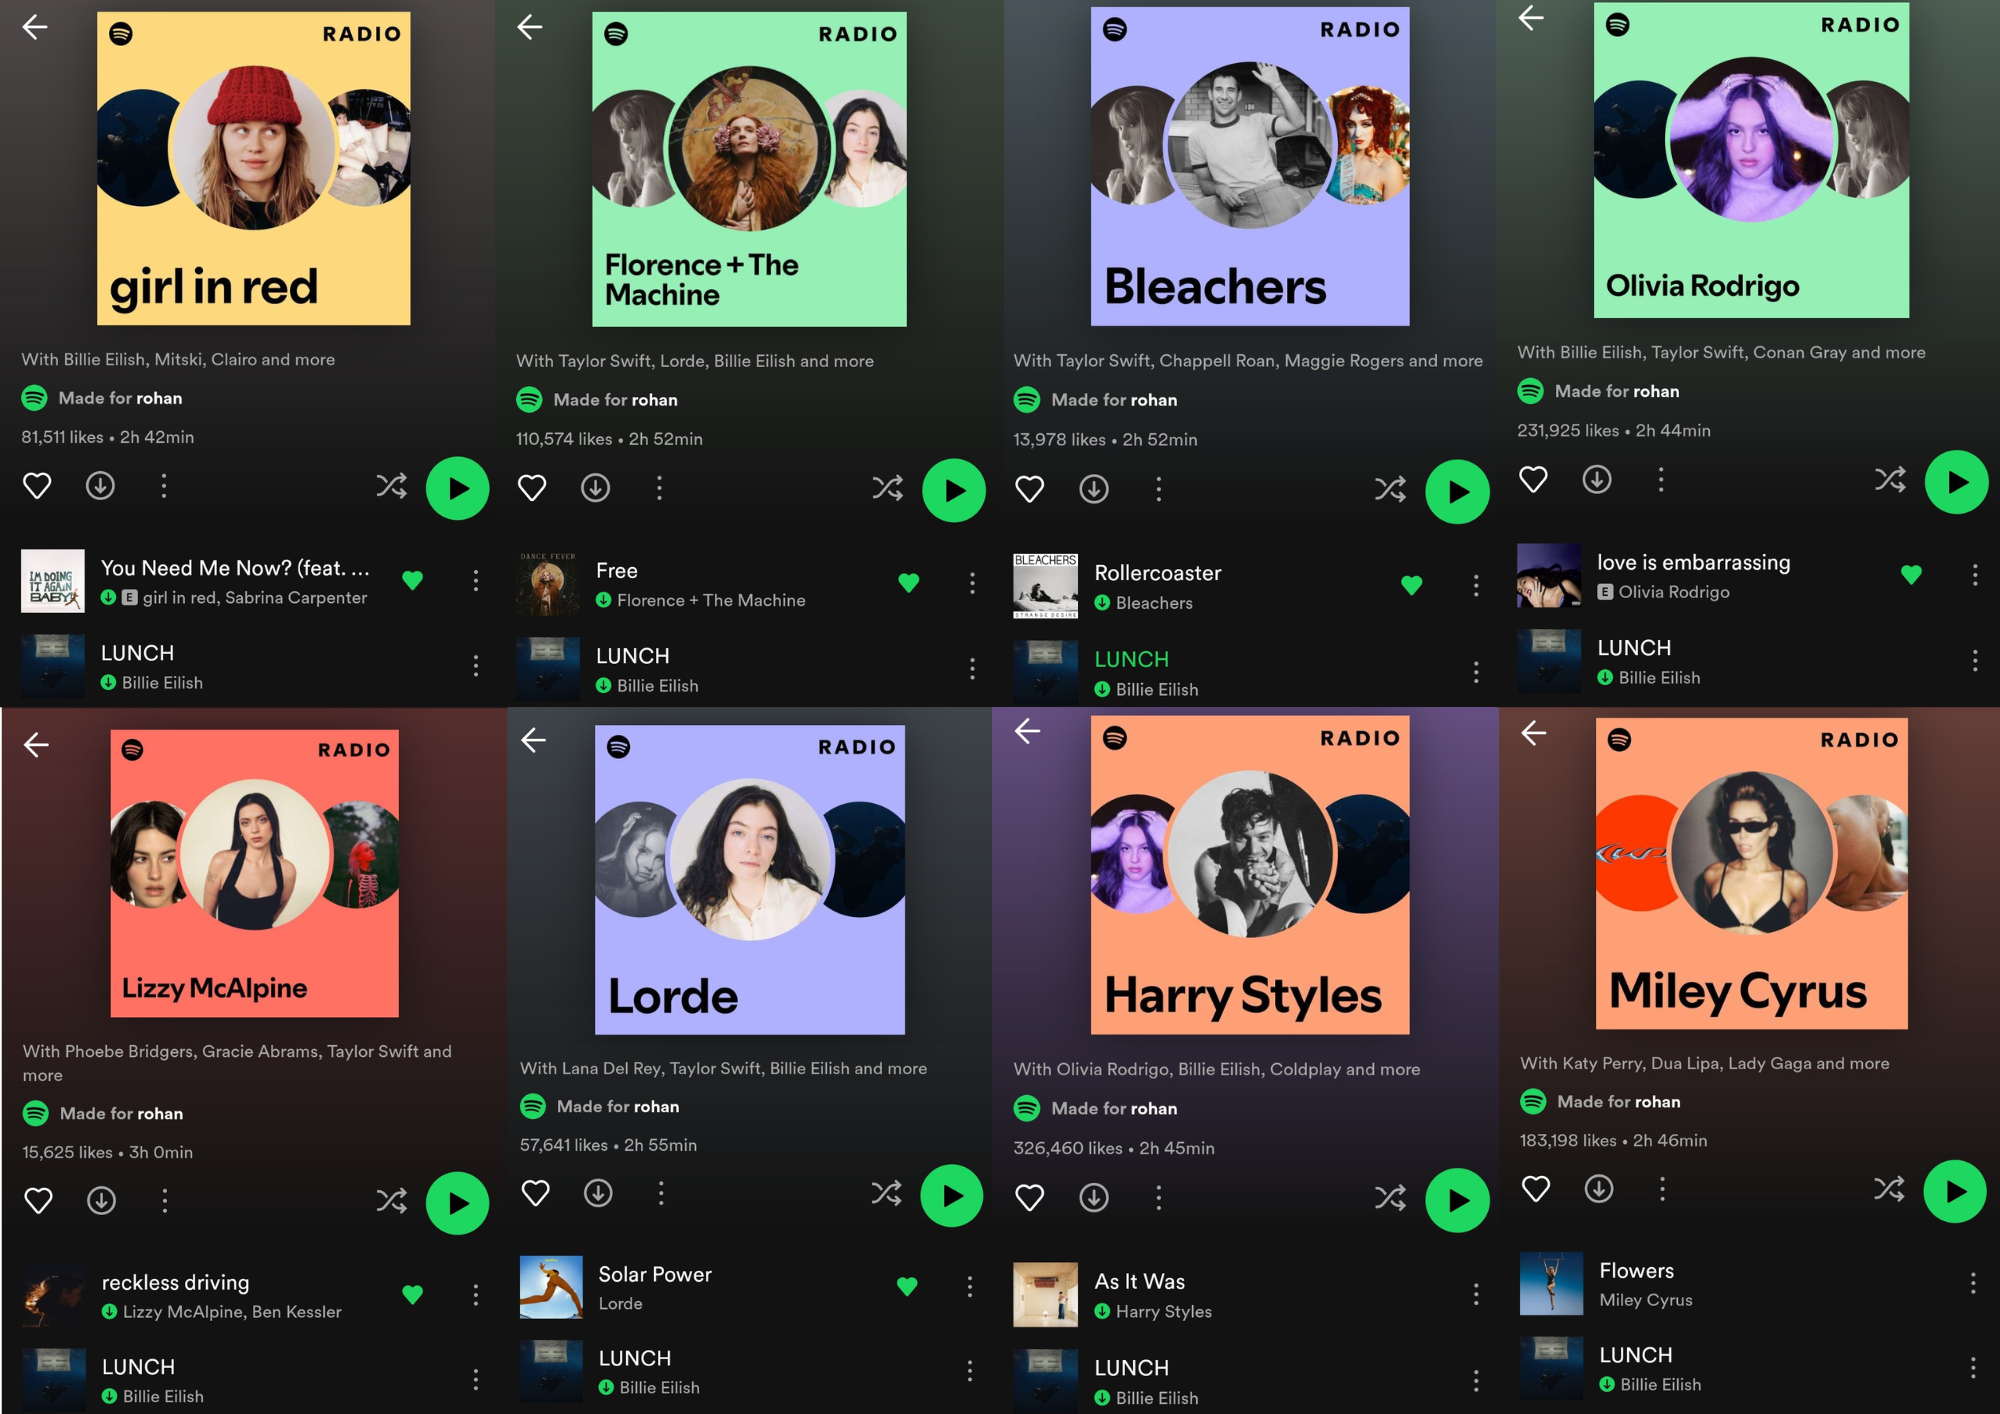 Eight screenshots of Spotify radio where the second song on each one is LUNCH. Artists are: girl in red, Florence + The Machine, Bleachers, Olivia Rodrigo, Lizzy McAlpine, Lorde, Harry Styles, Miley Cyrus